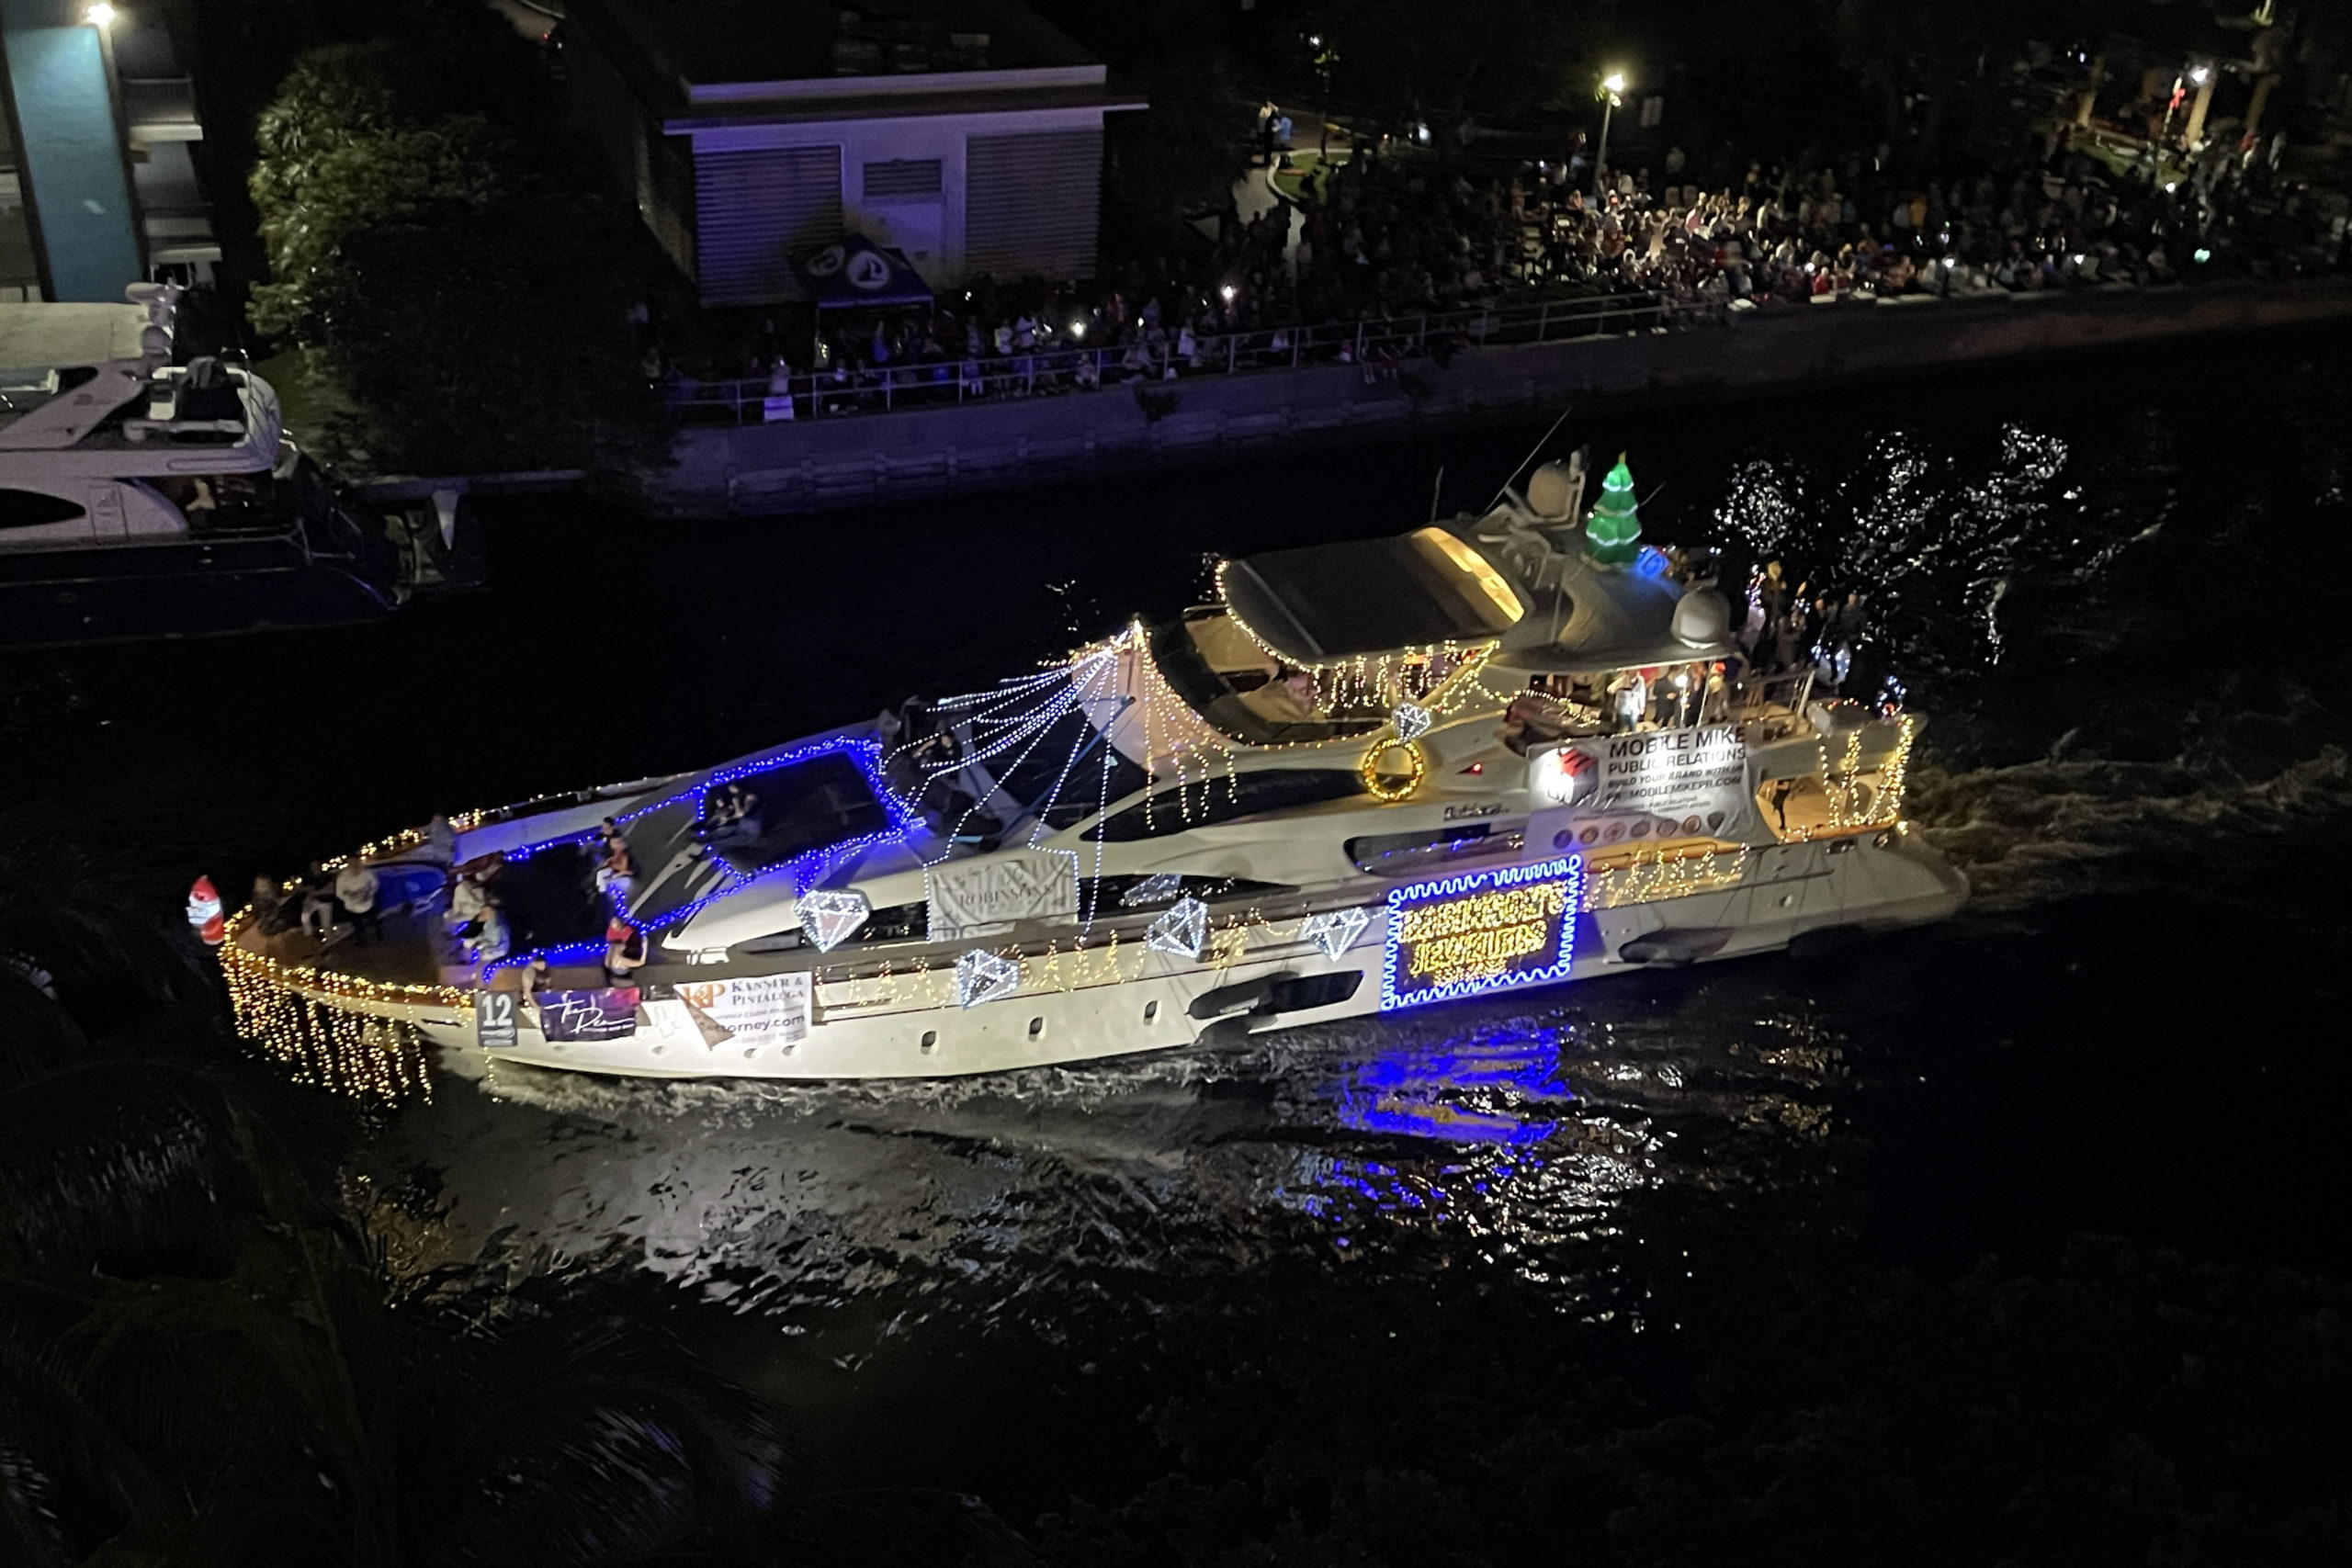 USS Mobile Mike, boat number 12 in the 2022 Winterfest Boat Parade